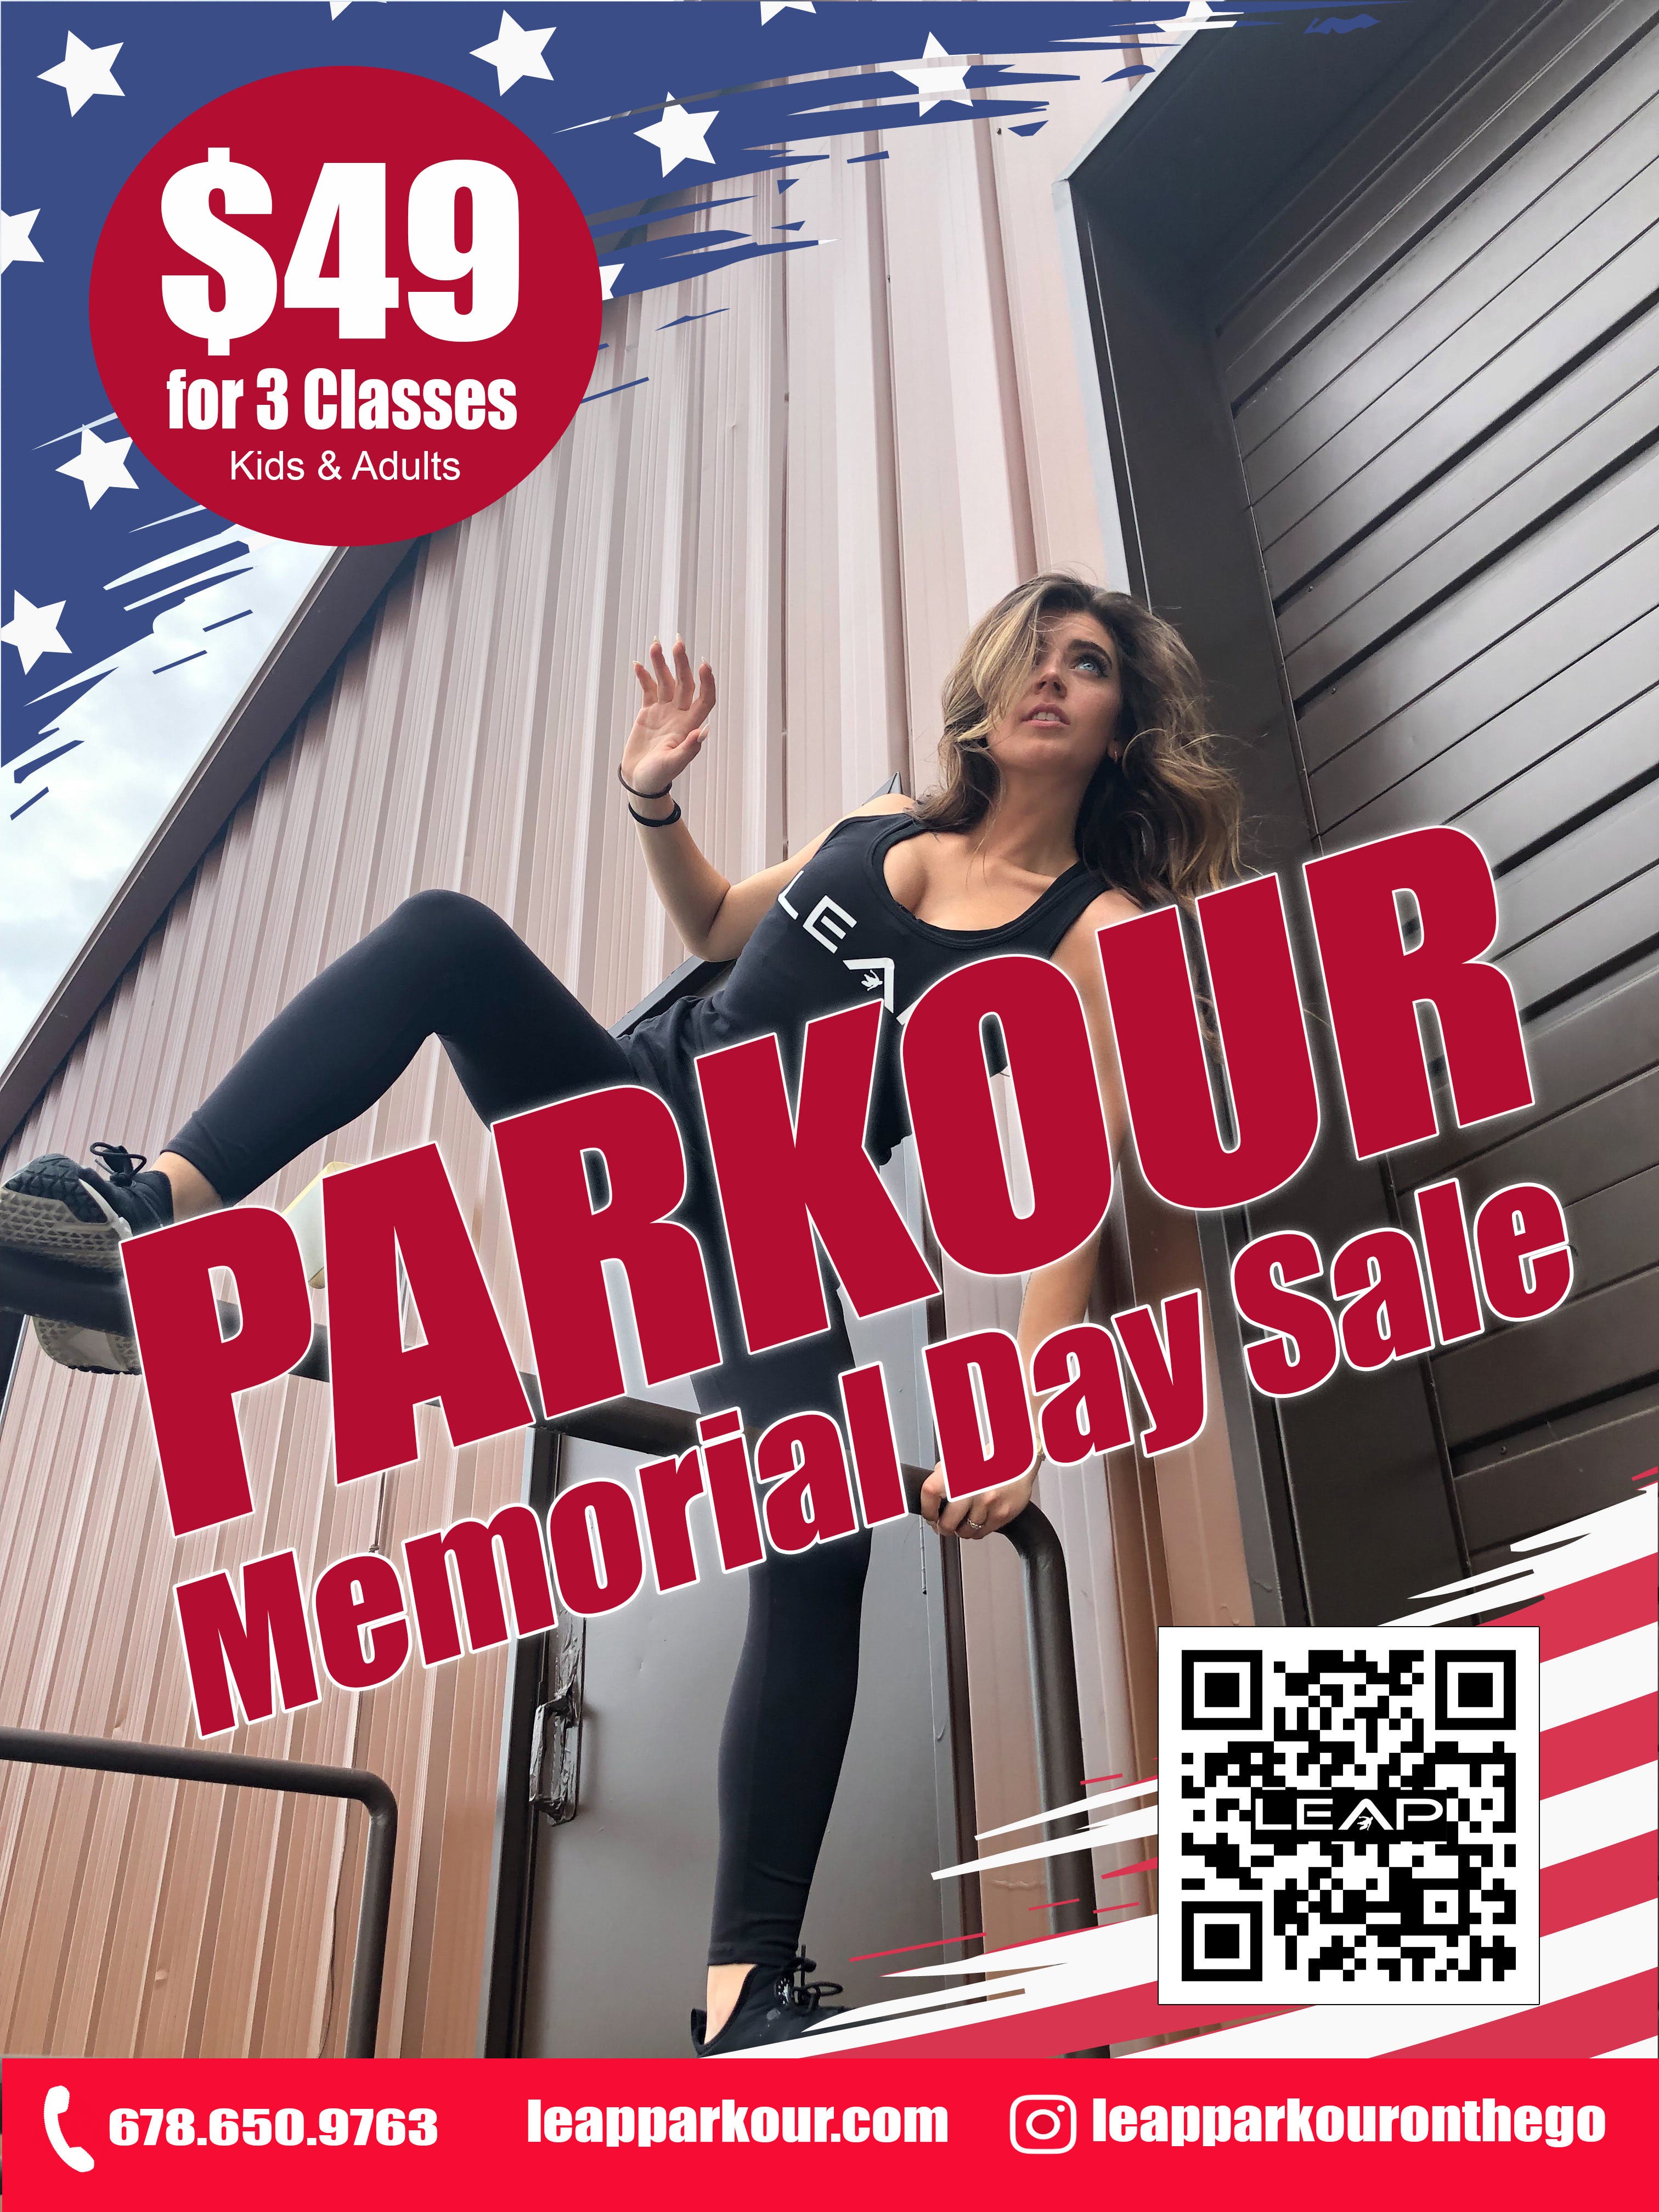 Memorial Day Sale! Kids & Adults Parkour Classes and Mobile Parties! 